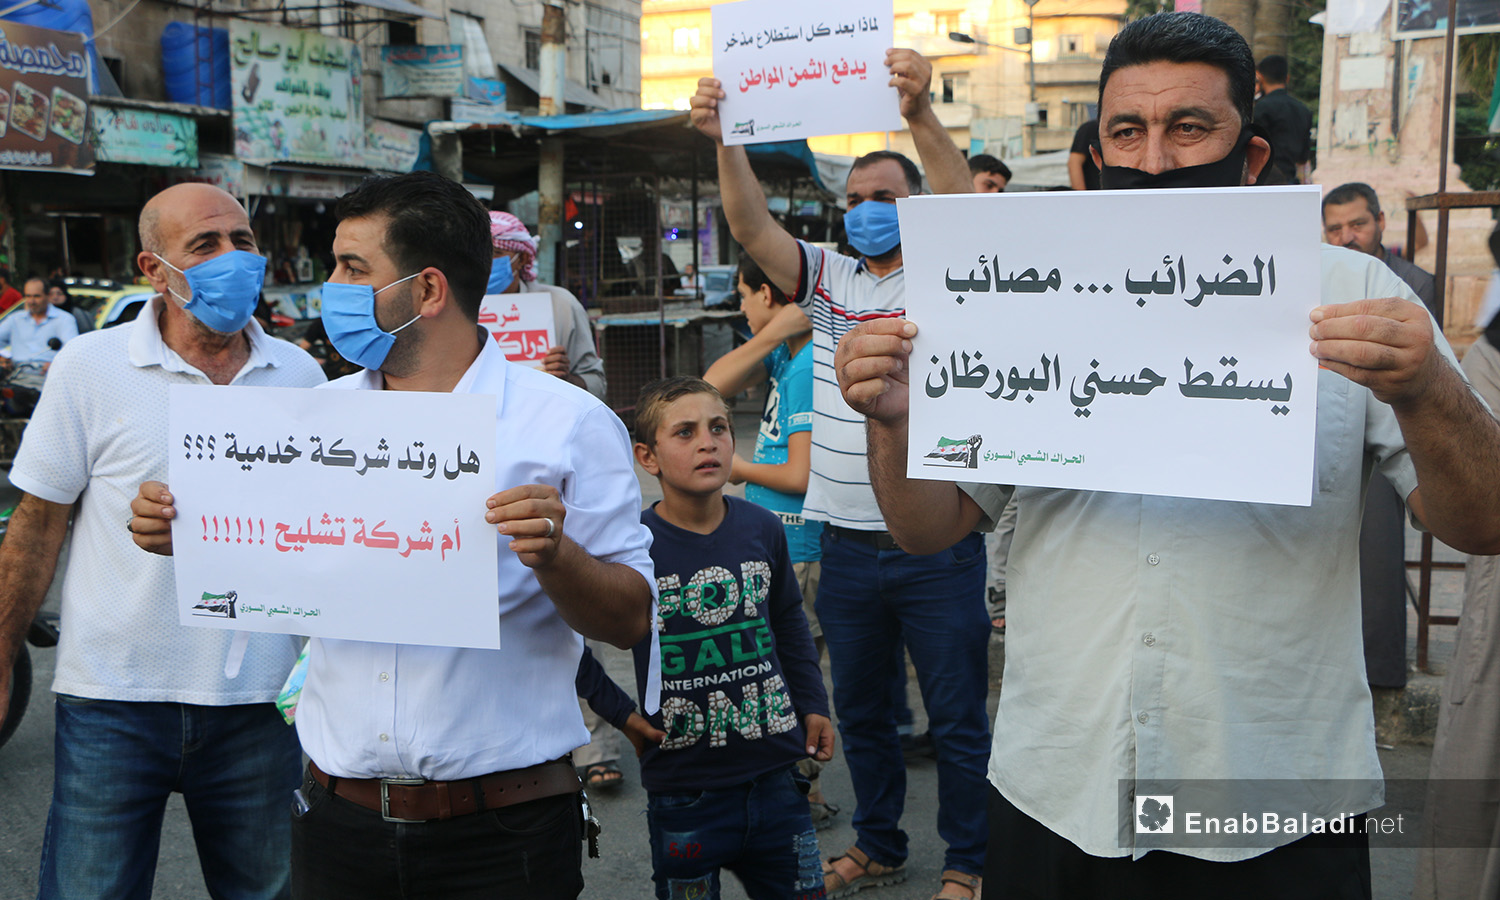 People in the city of Idlib are protesting against the high fuel prices and the high cost of living - 4 August 2020 (Enab Baladi / Anas al-Khouli)